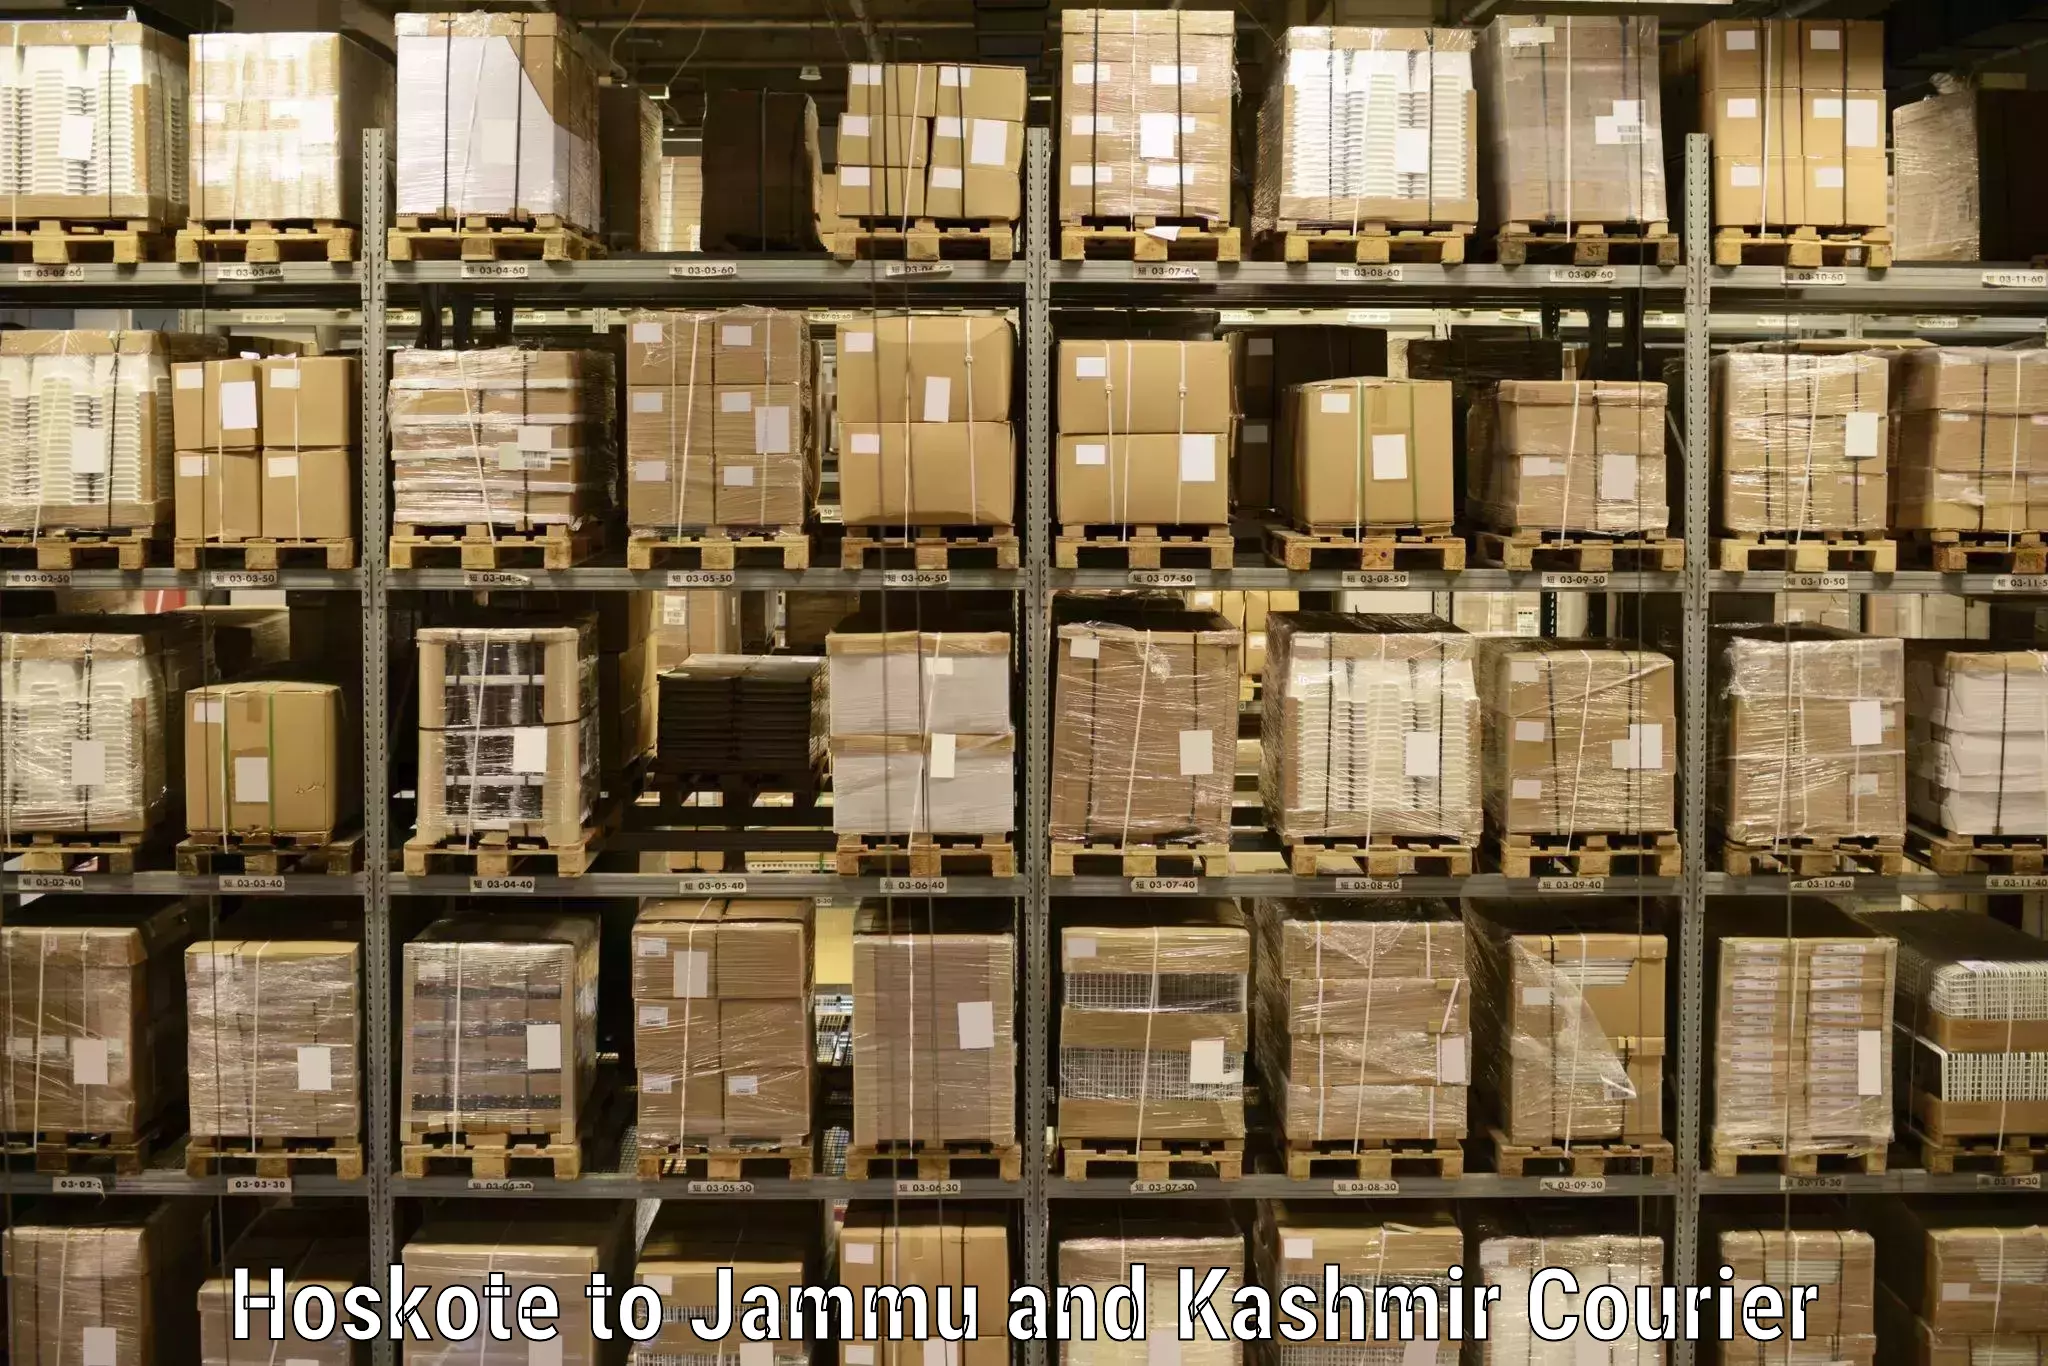 Express delivery capabilities Hoskote to Anantnag